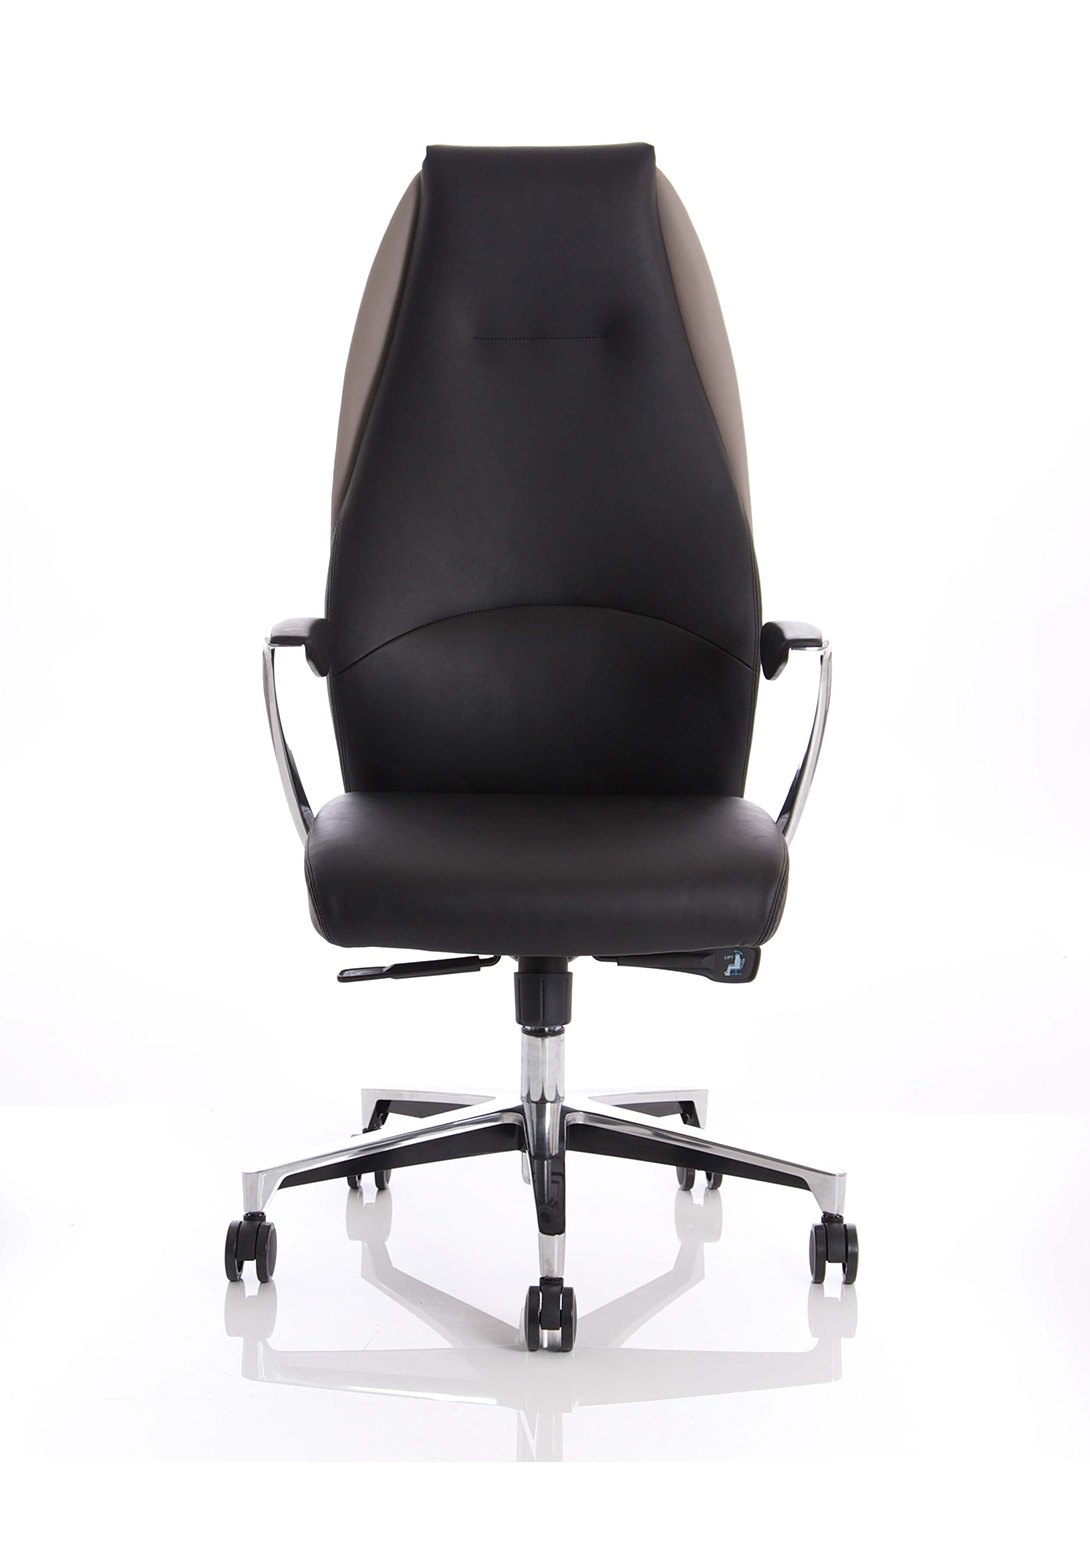 Mien High Back Leather Executive Office Chair